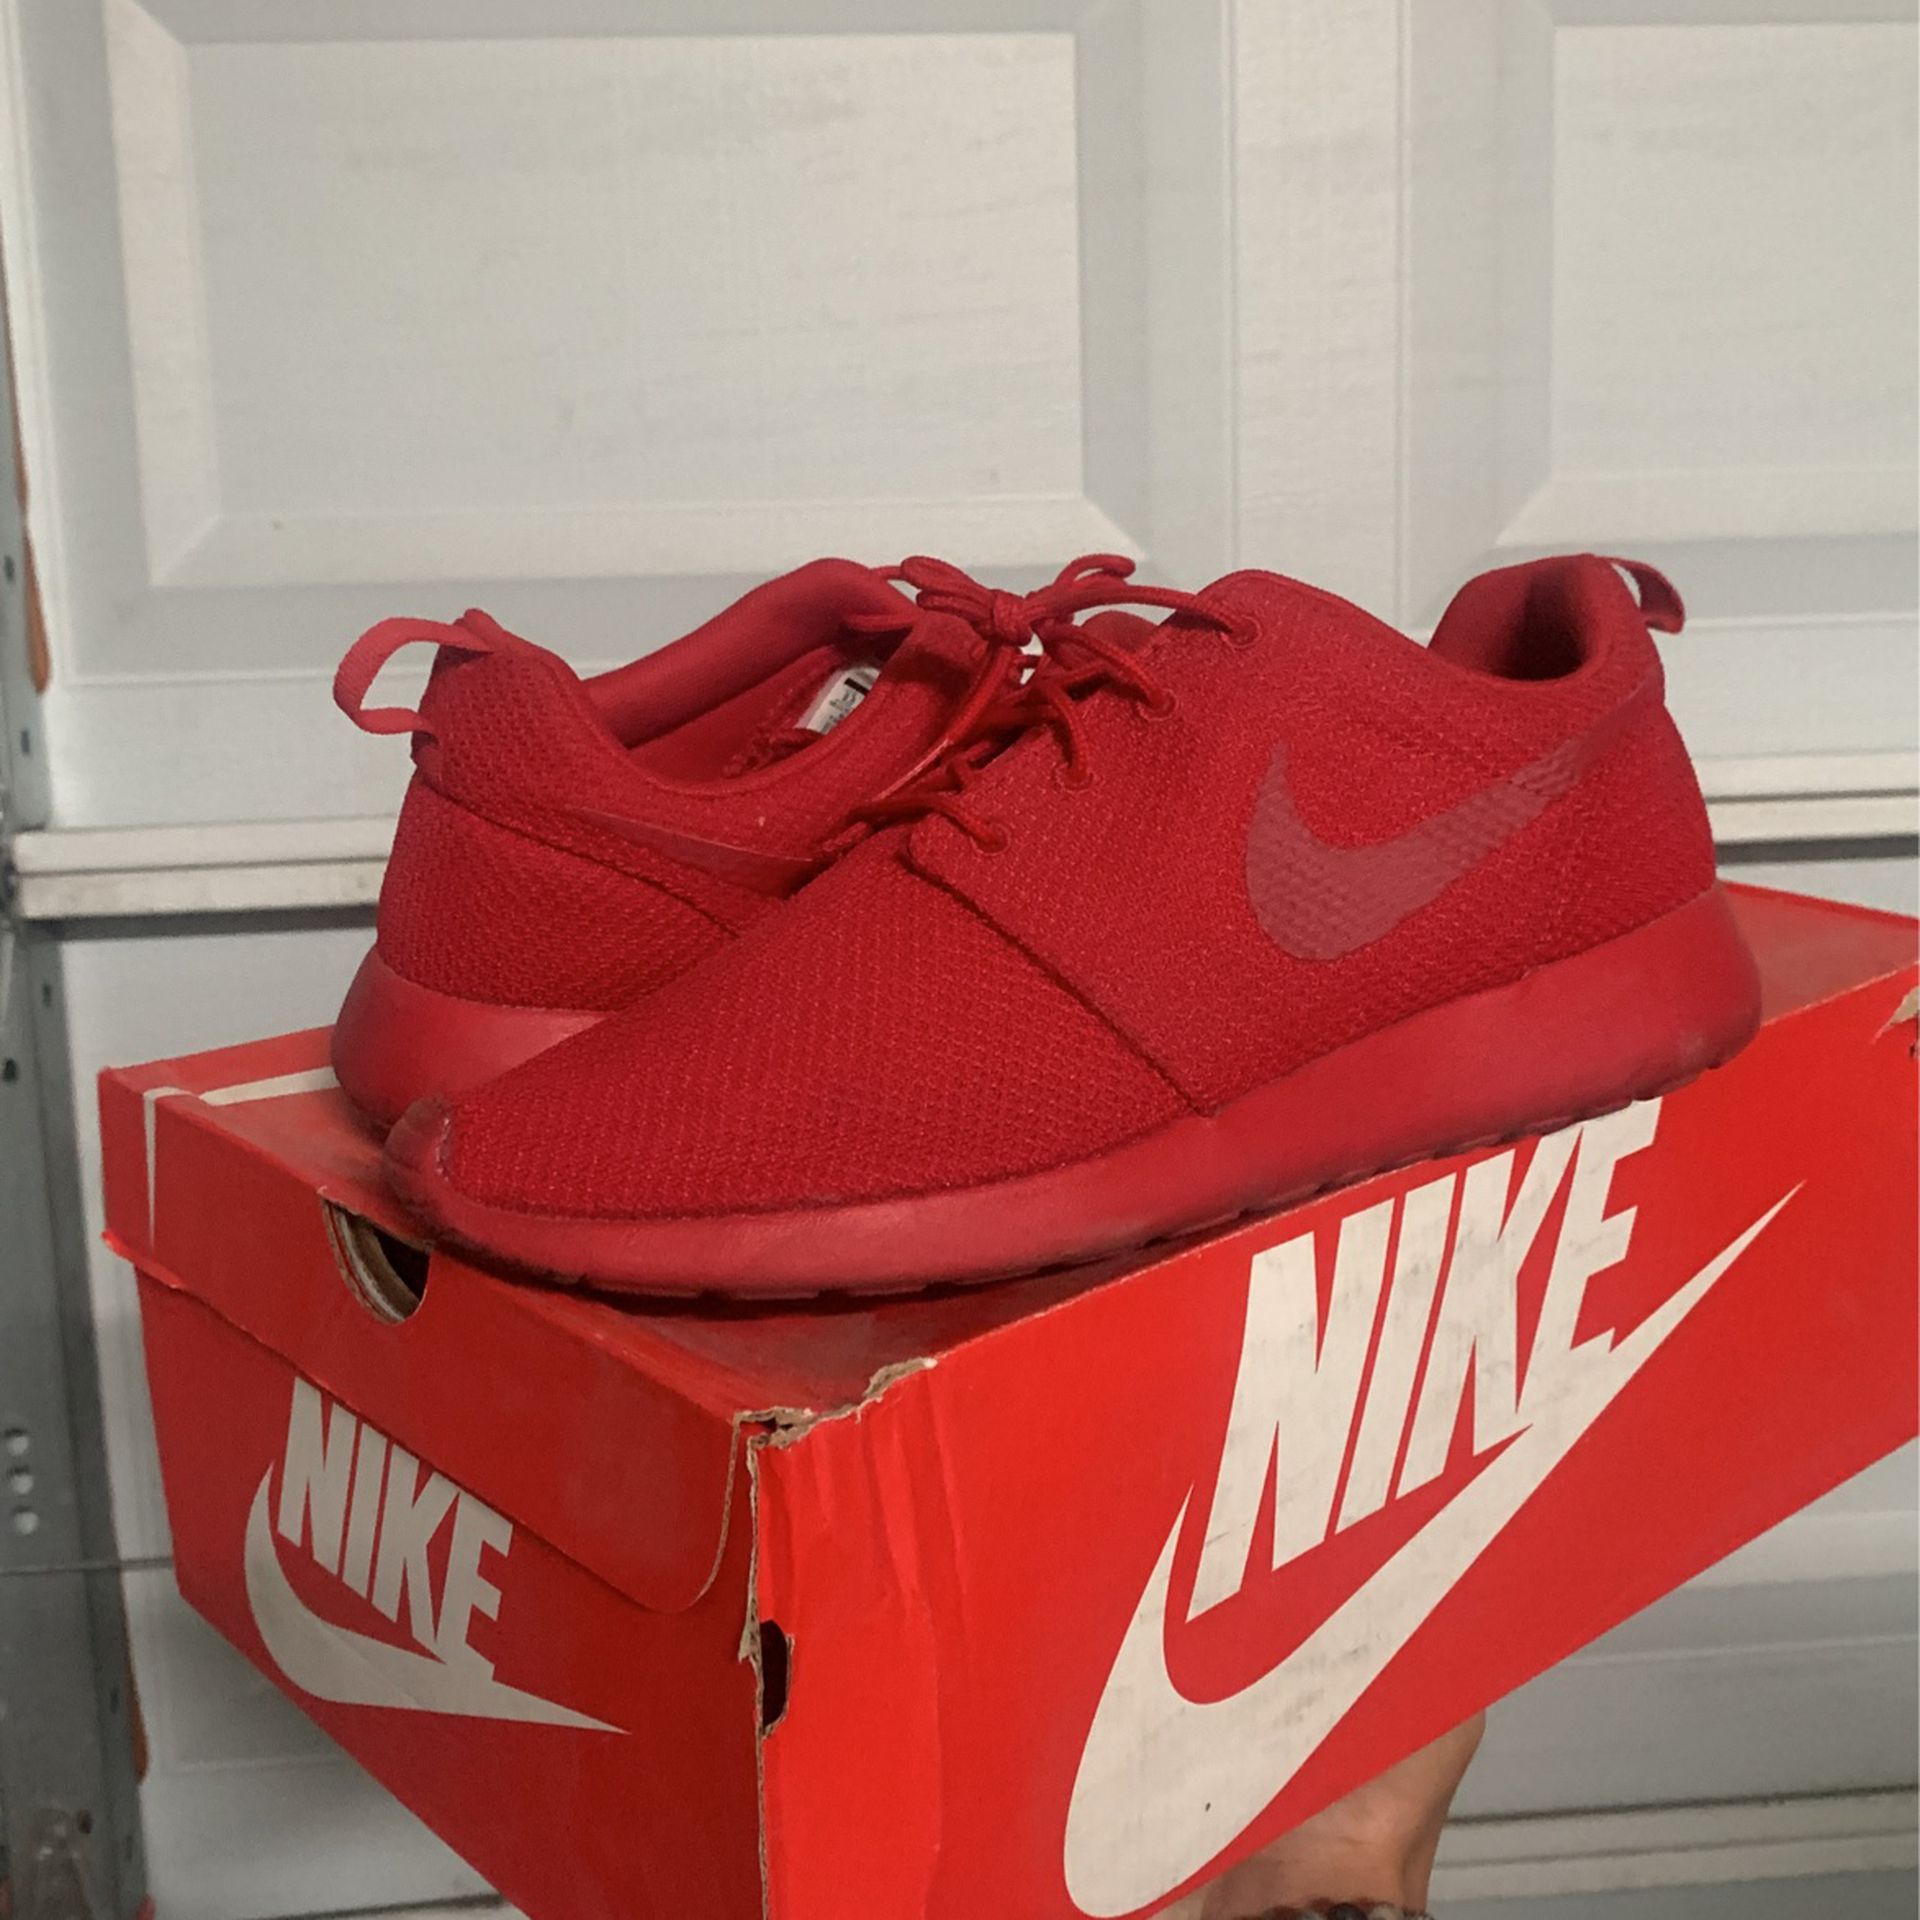 Attent Discipline mei Nike Roshe One Triple Red Running Shoes Size 9.5 for Sale in Las Vegas, NV  - OfferUp